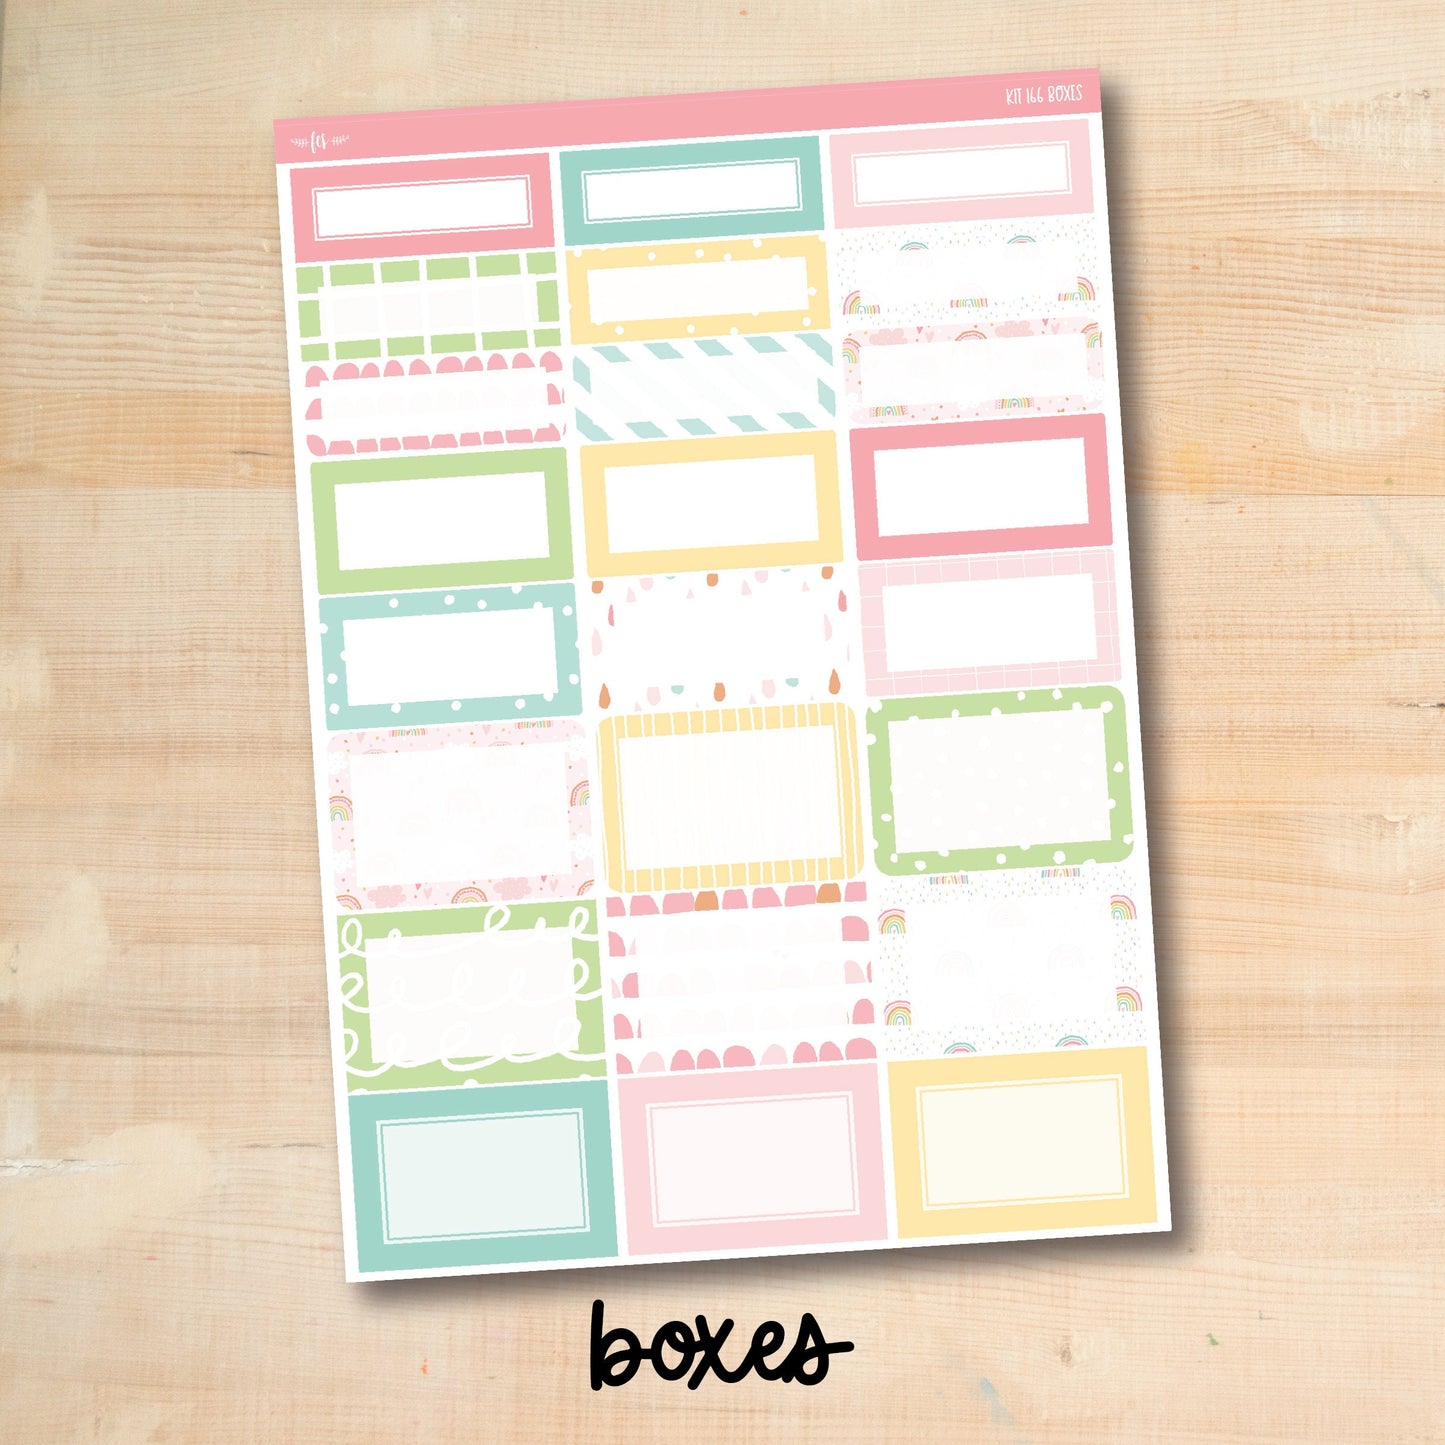 KIT-166 || SUNNY SKIES weekly planner kit for Erin Condren, Plum Paper, MakseLife and more!